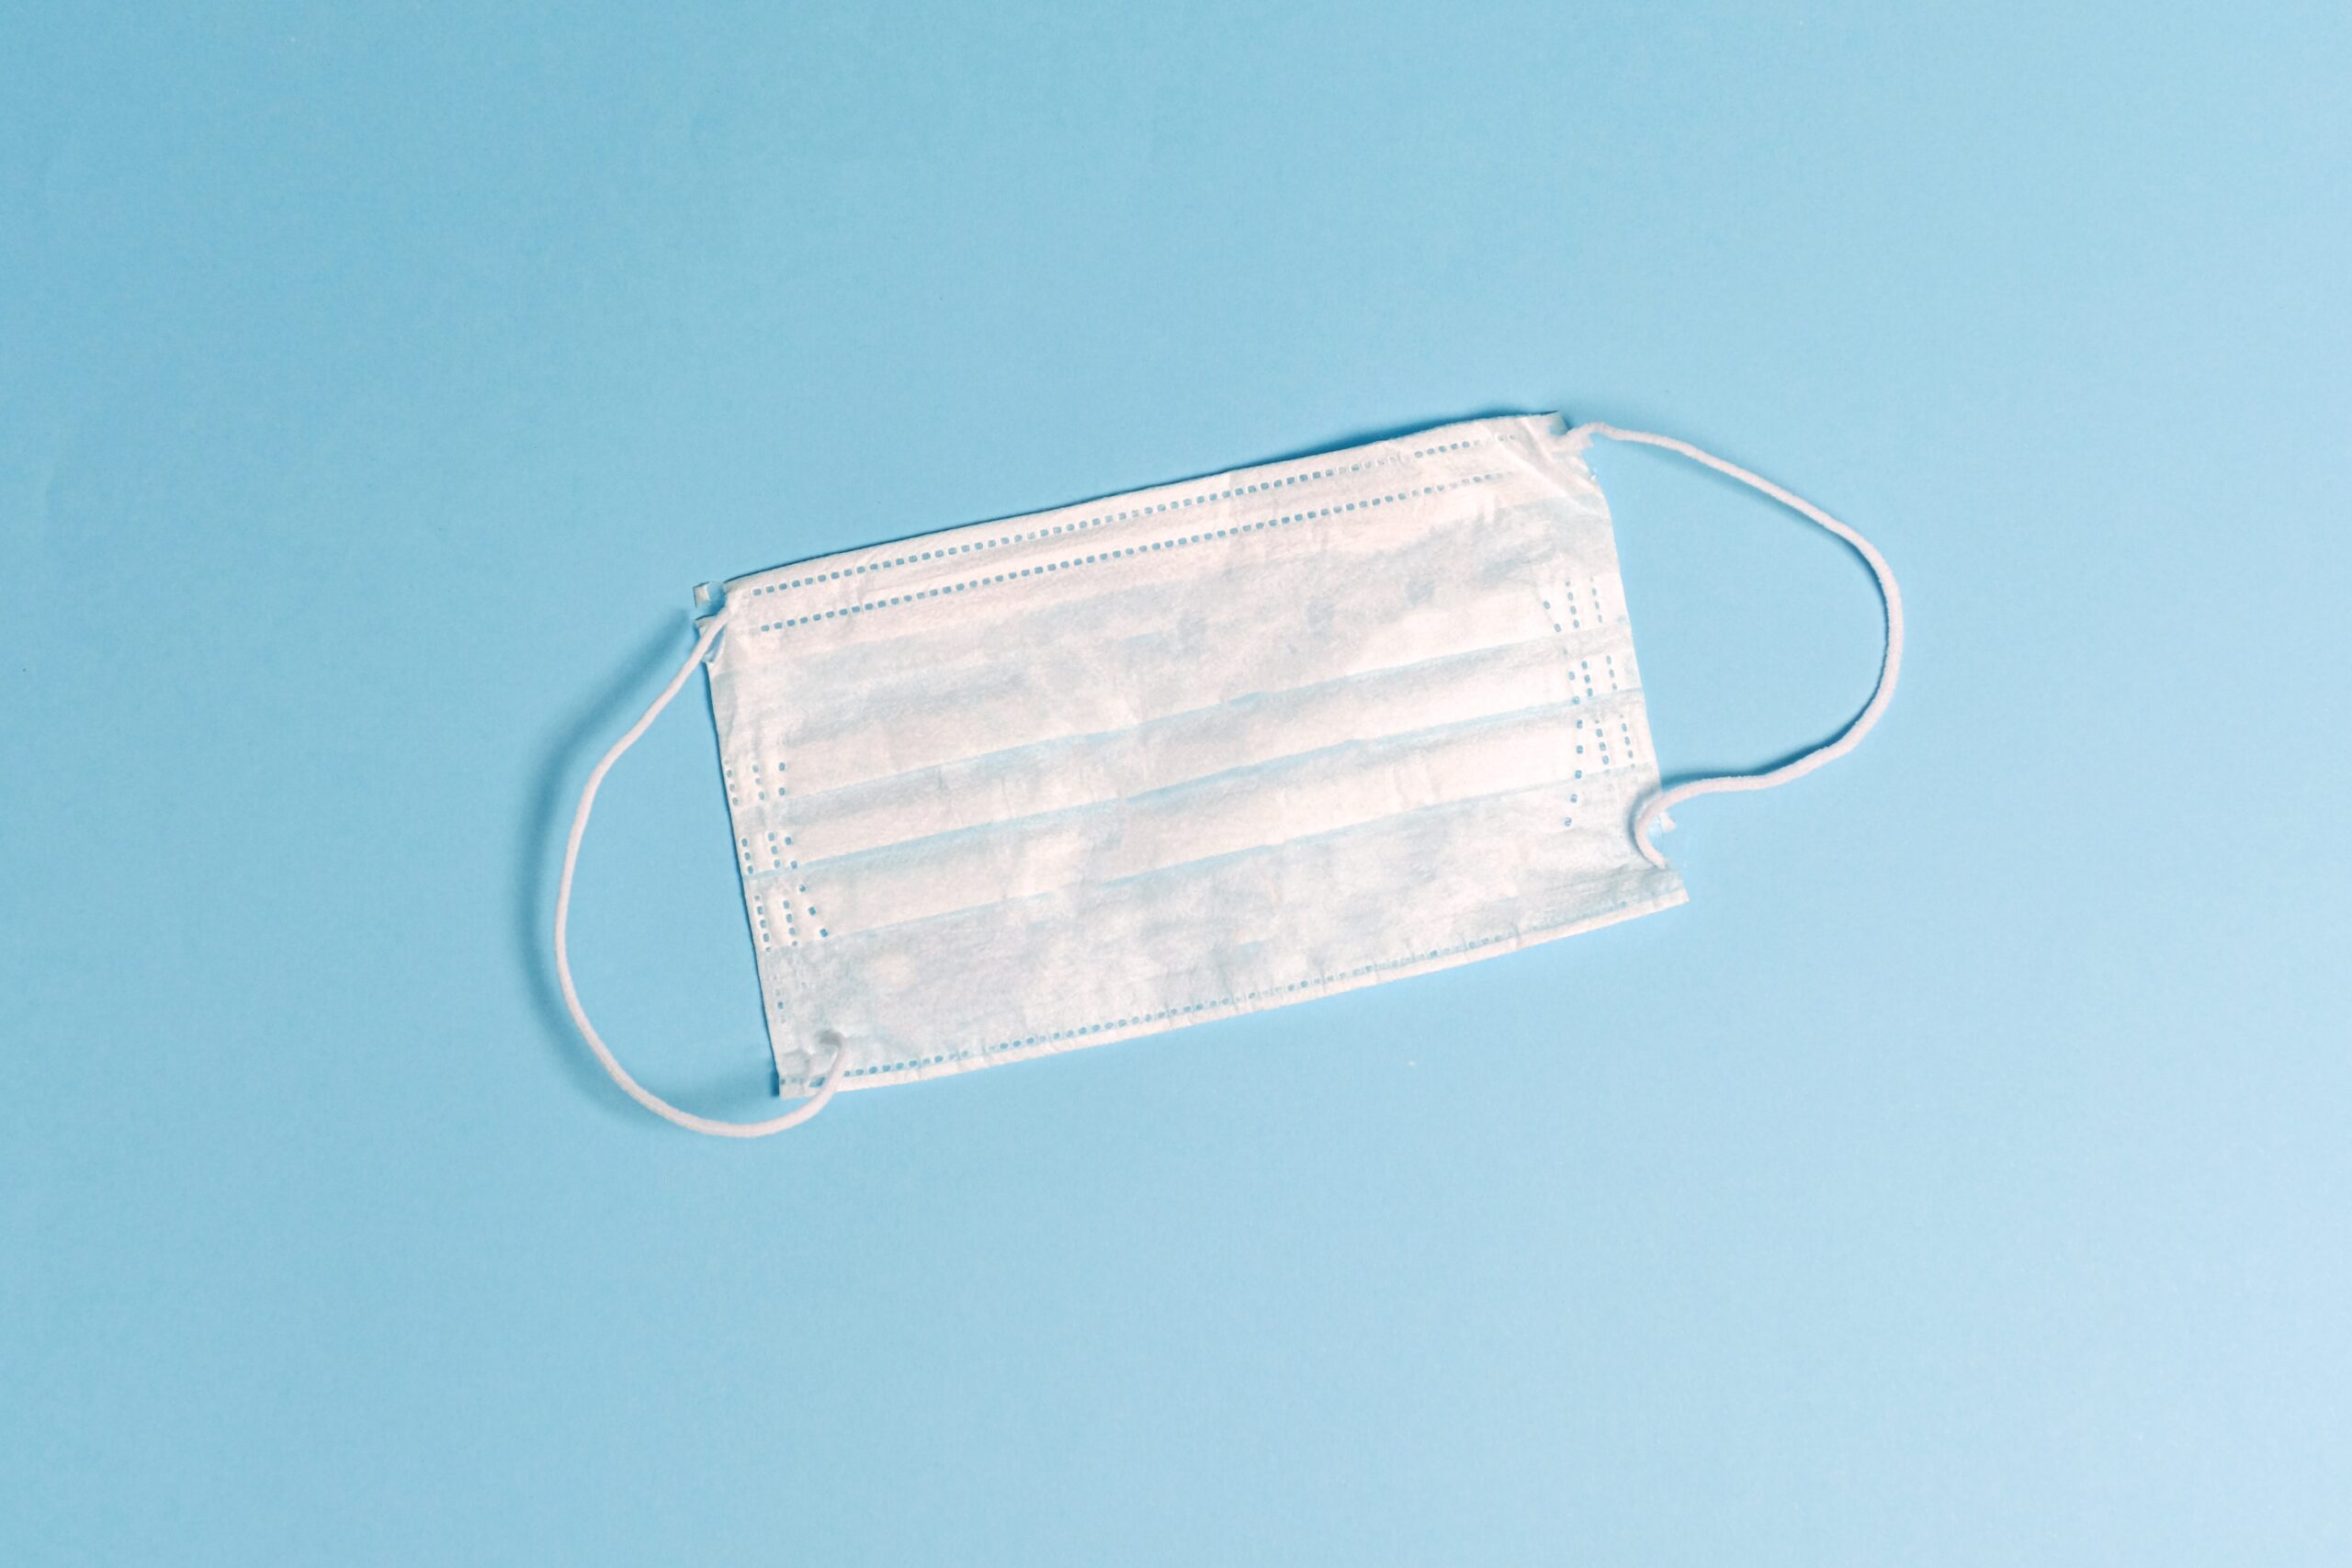 Translation and Covid-19: surgical mask